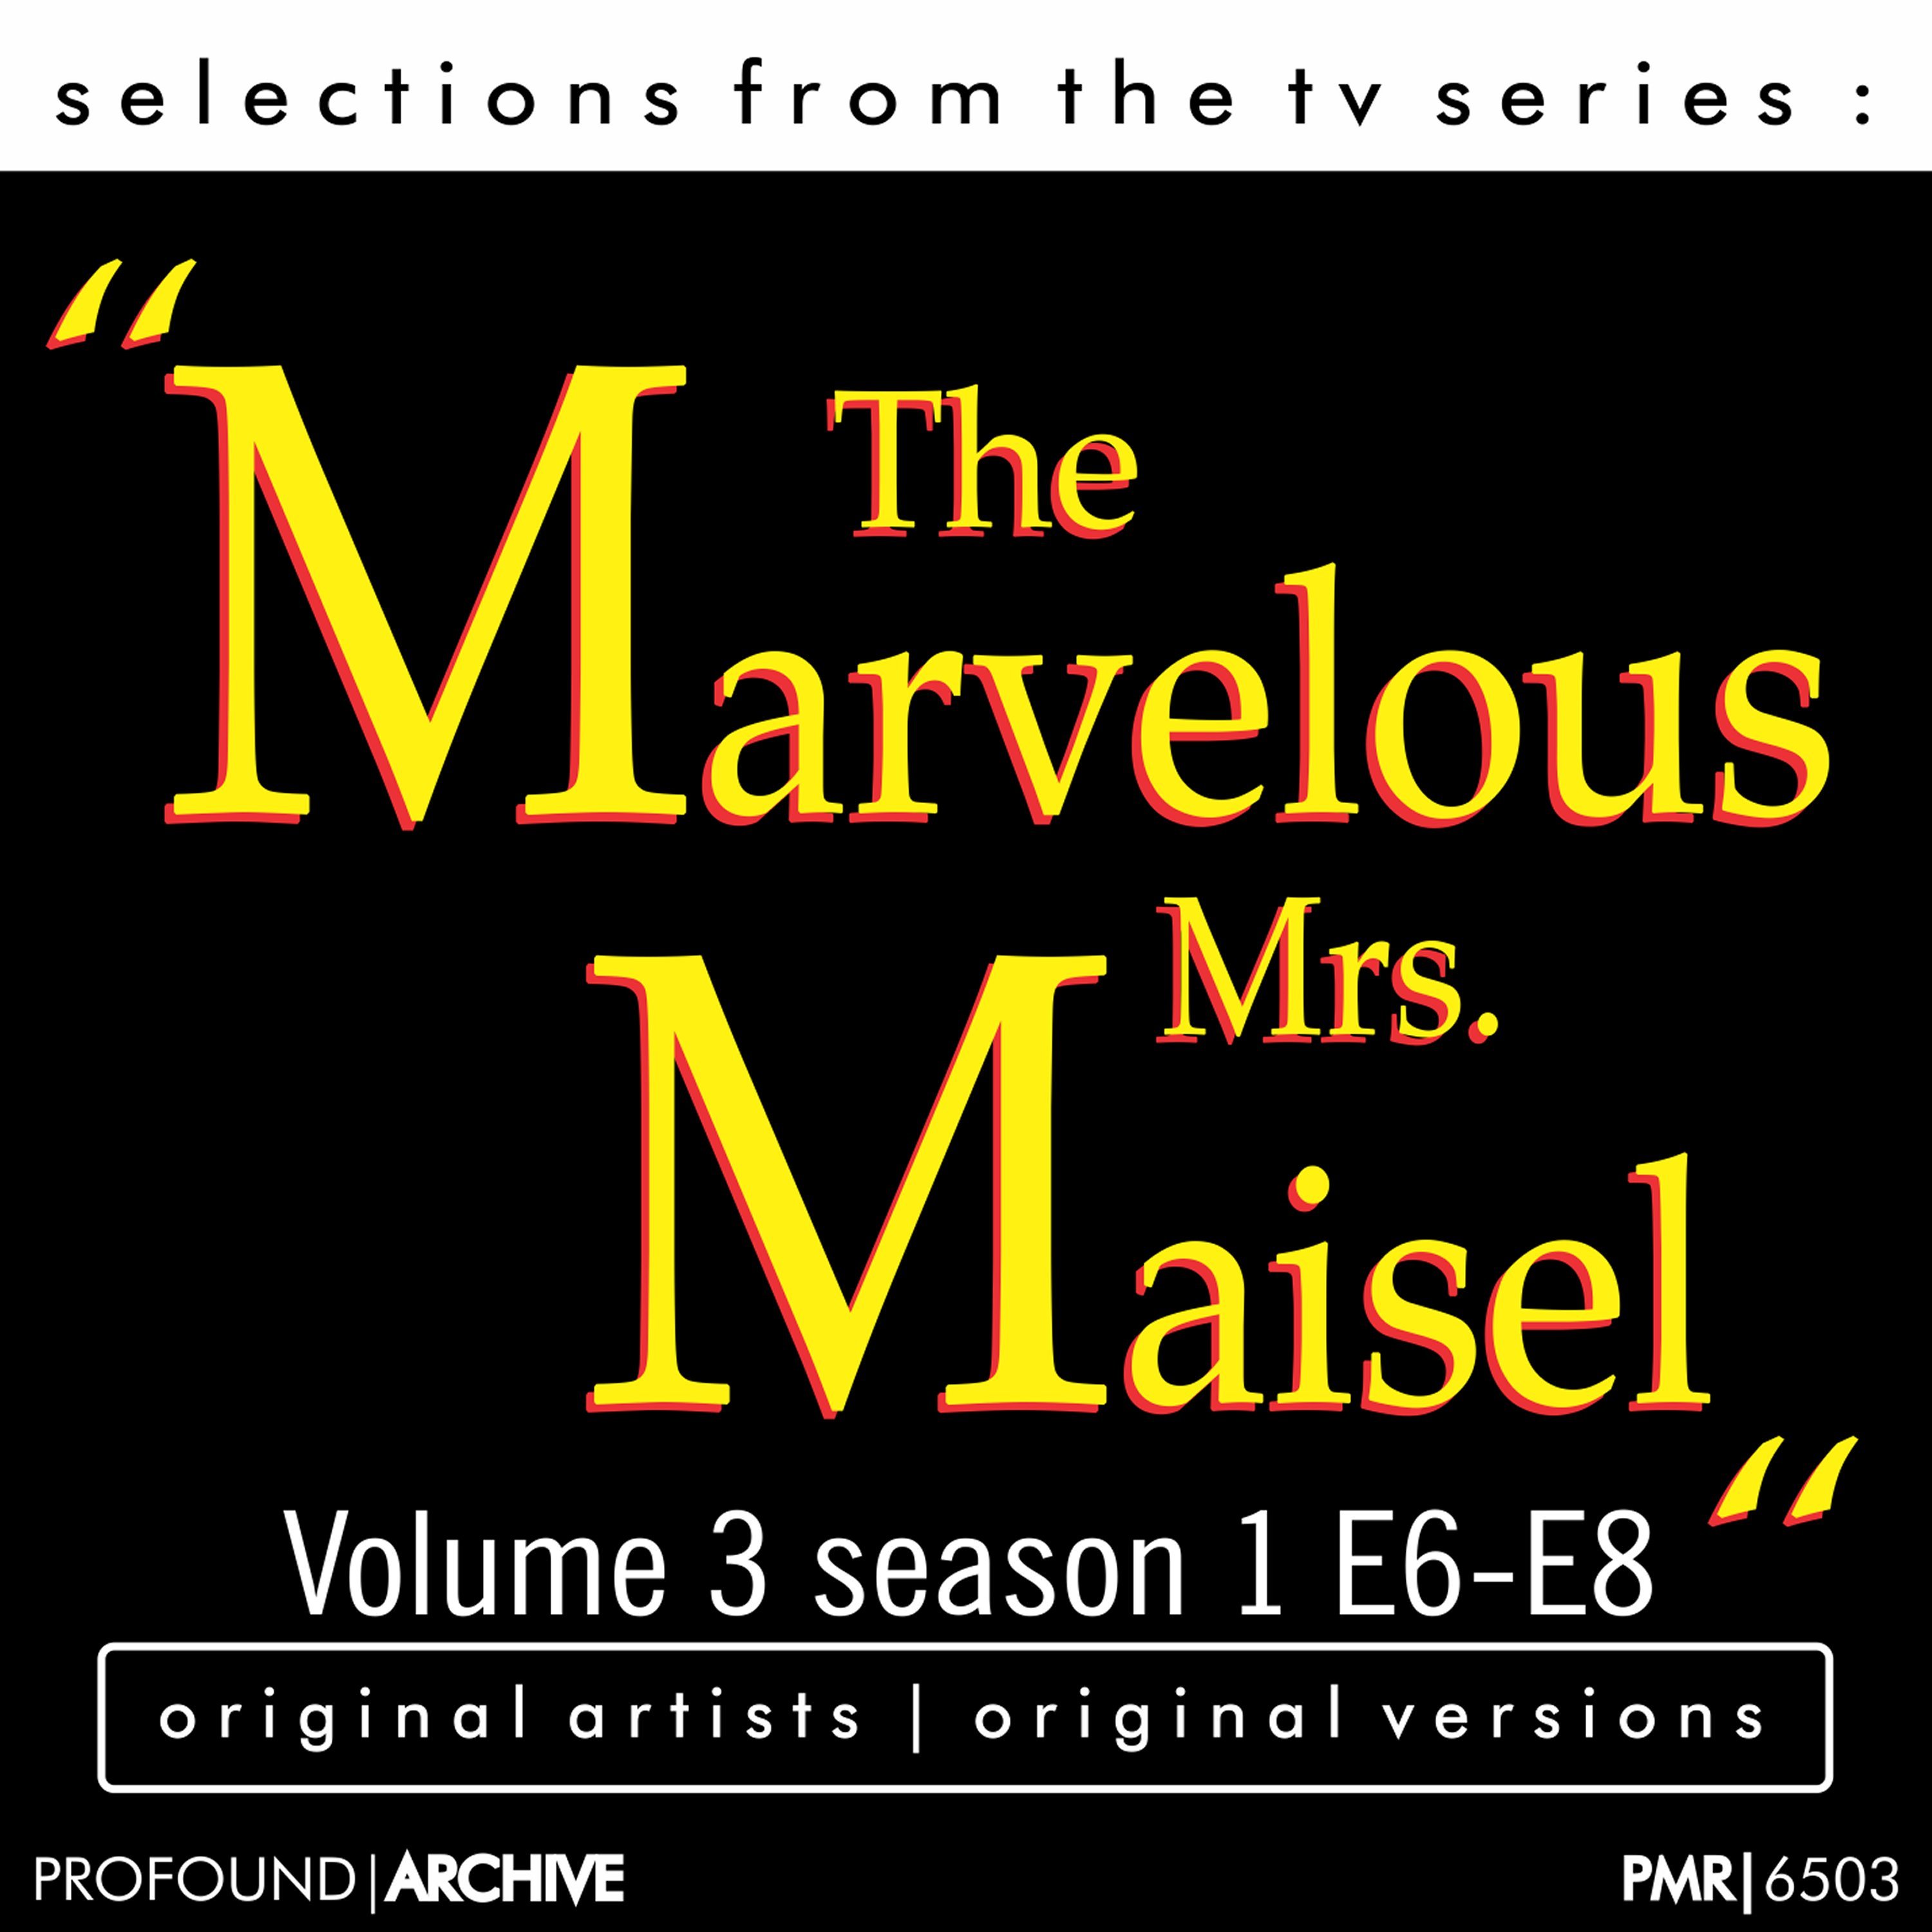 Selections from the T.V. Series; "'The Marvelous Mrs. Maisel", Volume 3